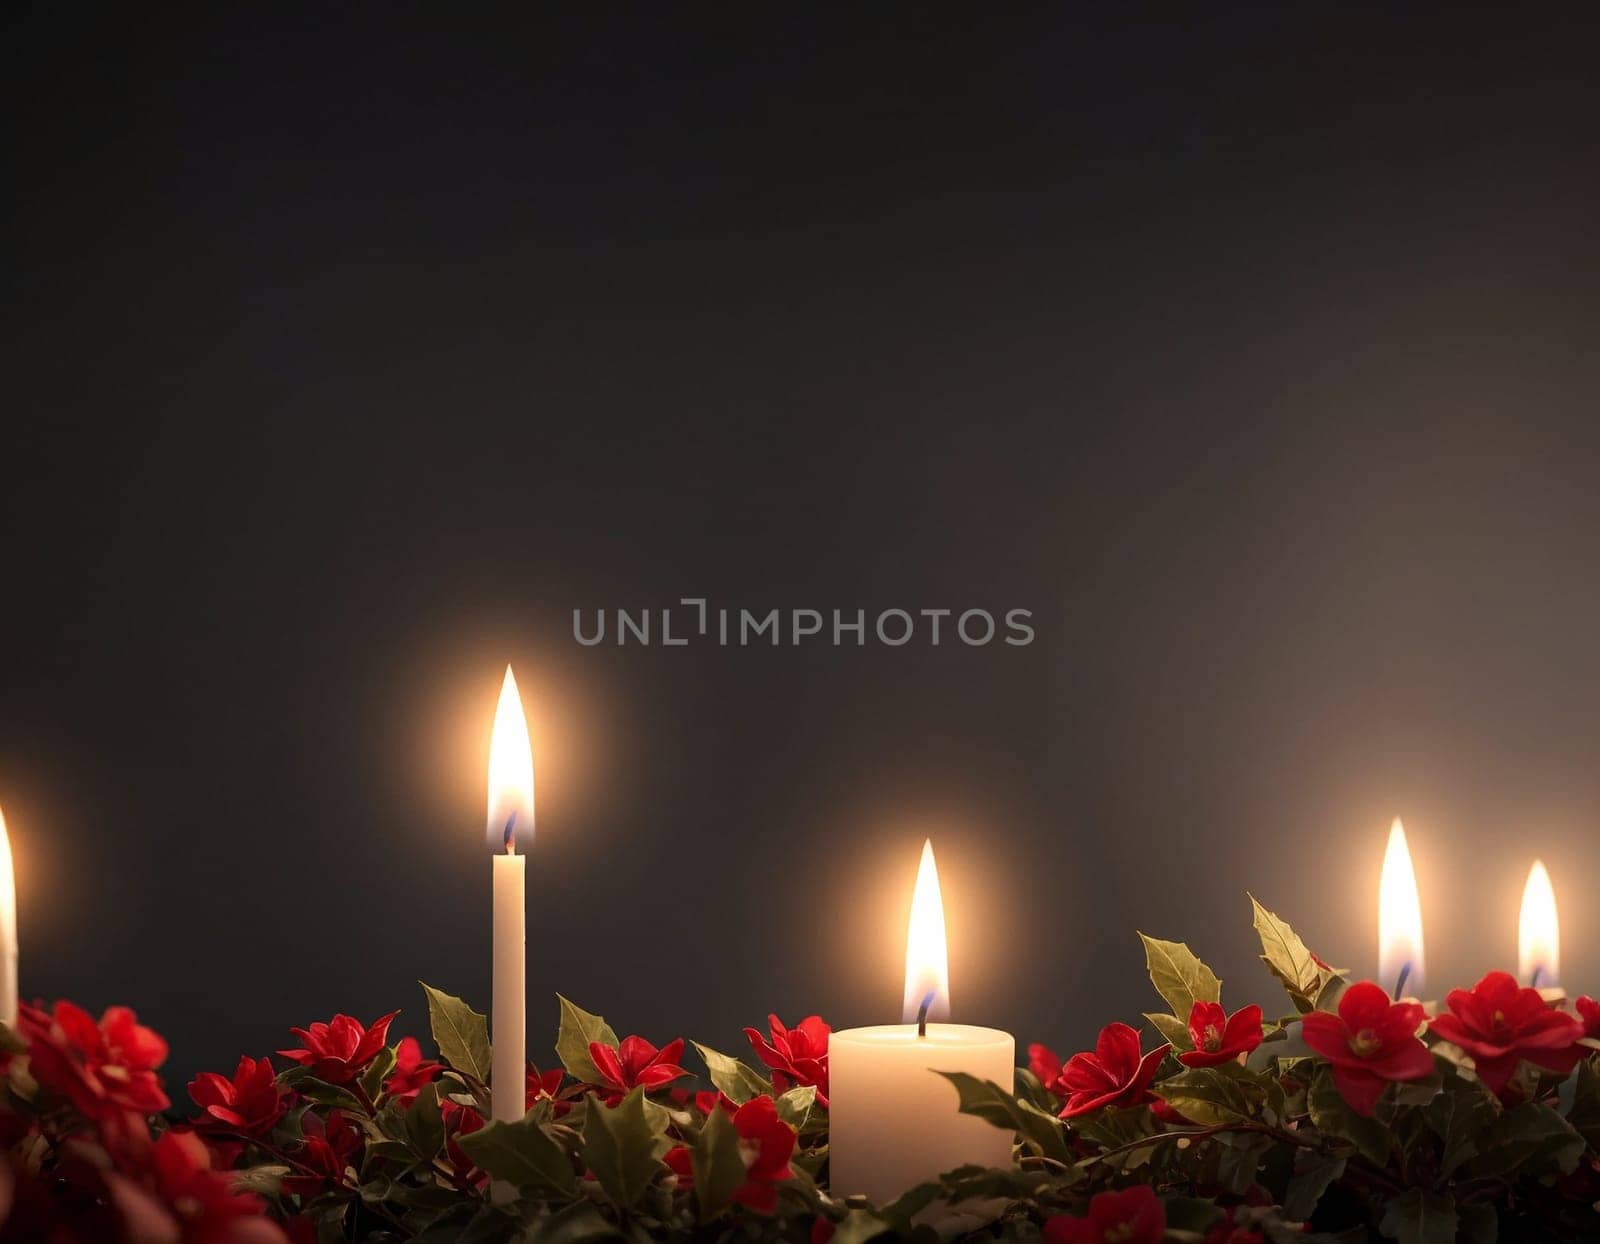 Candle and flowers. High quality illustration